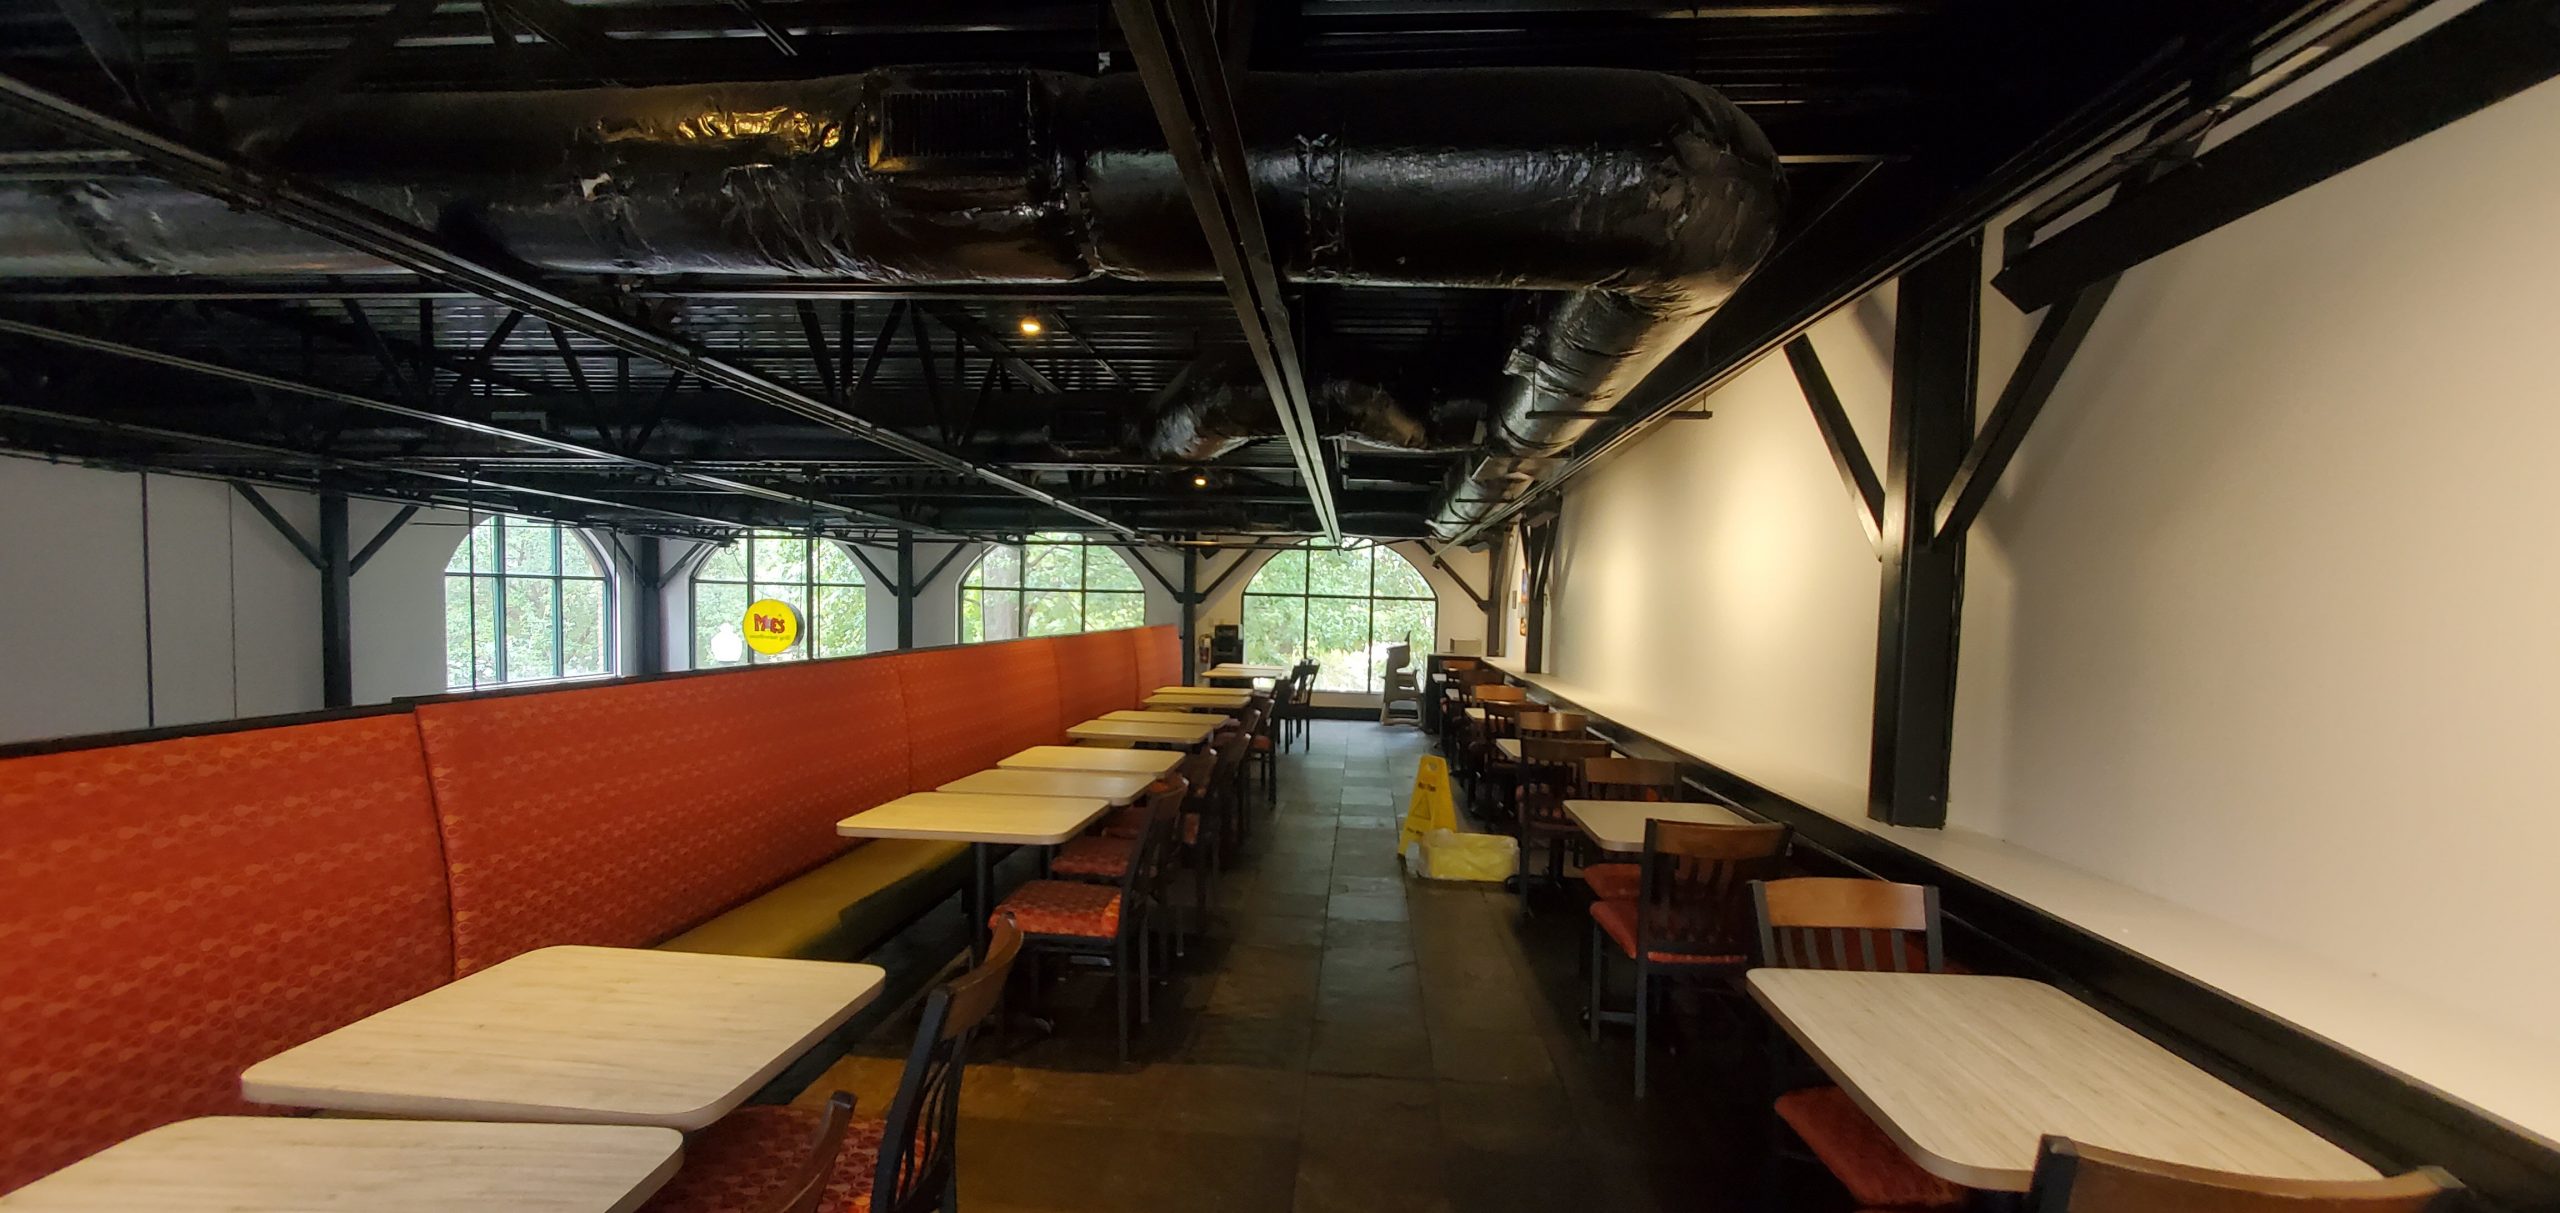 Moe’s Southwest Grill – Mount Pleasant, South Carolina After